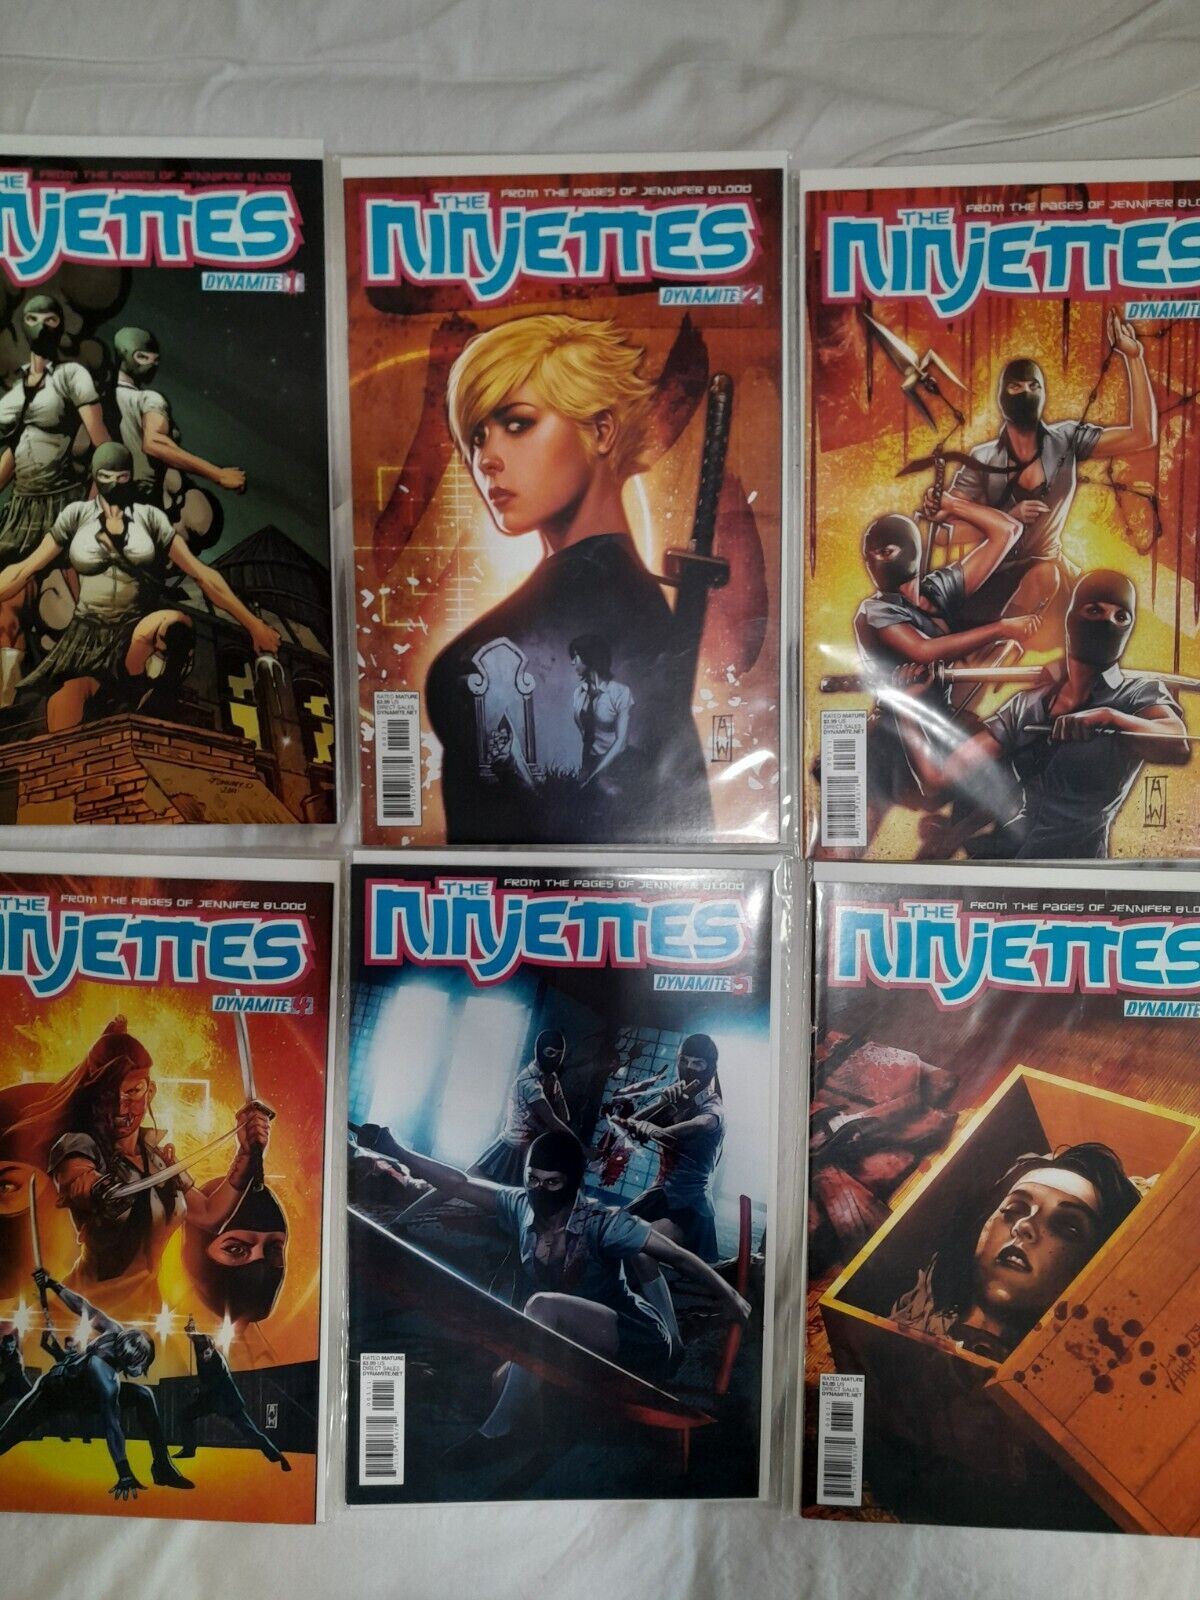 Dynamite THE NINJETTES (2012) #1 2 3 4 5 6 Lot VF to VF/NM Bagged Boarded